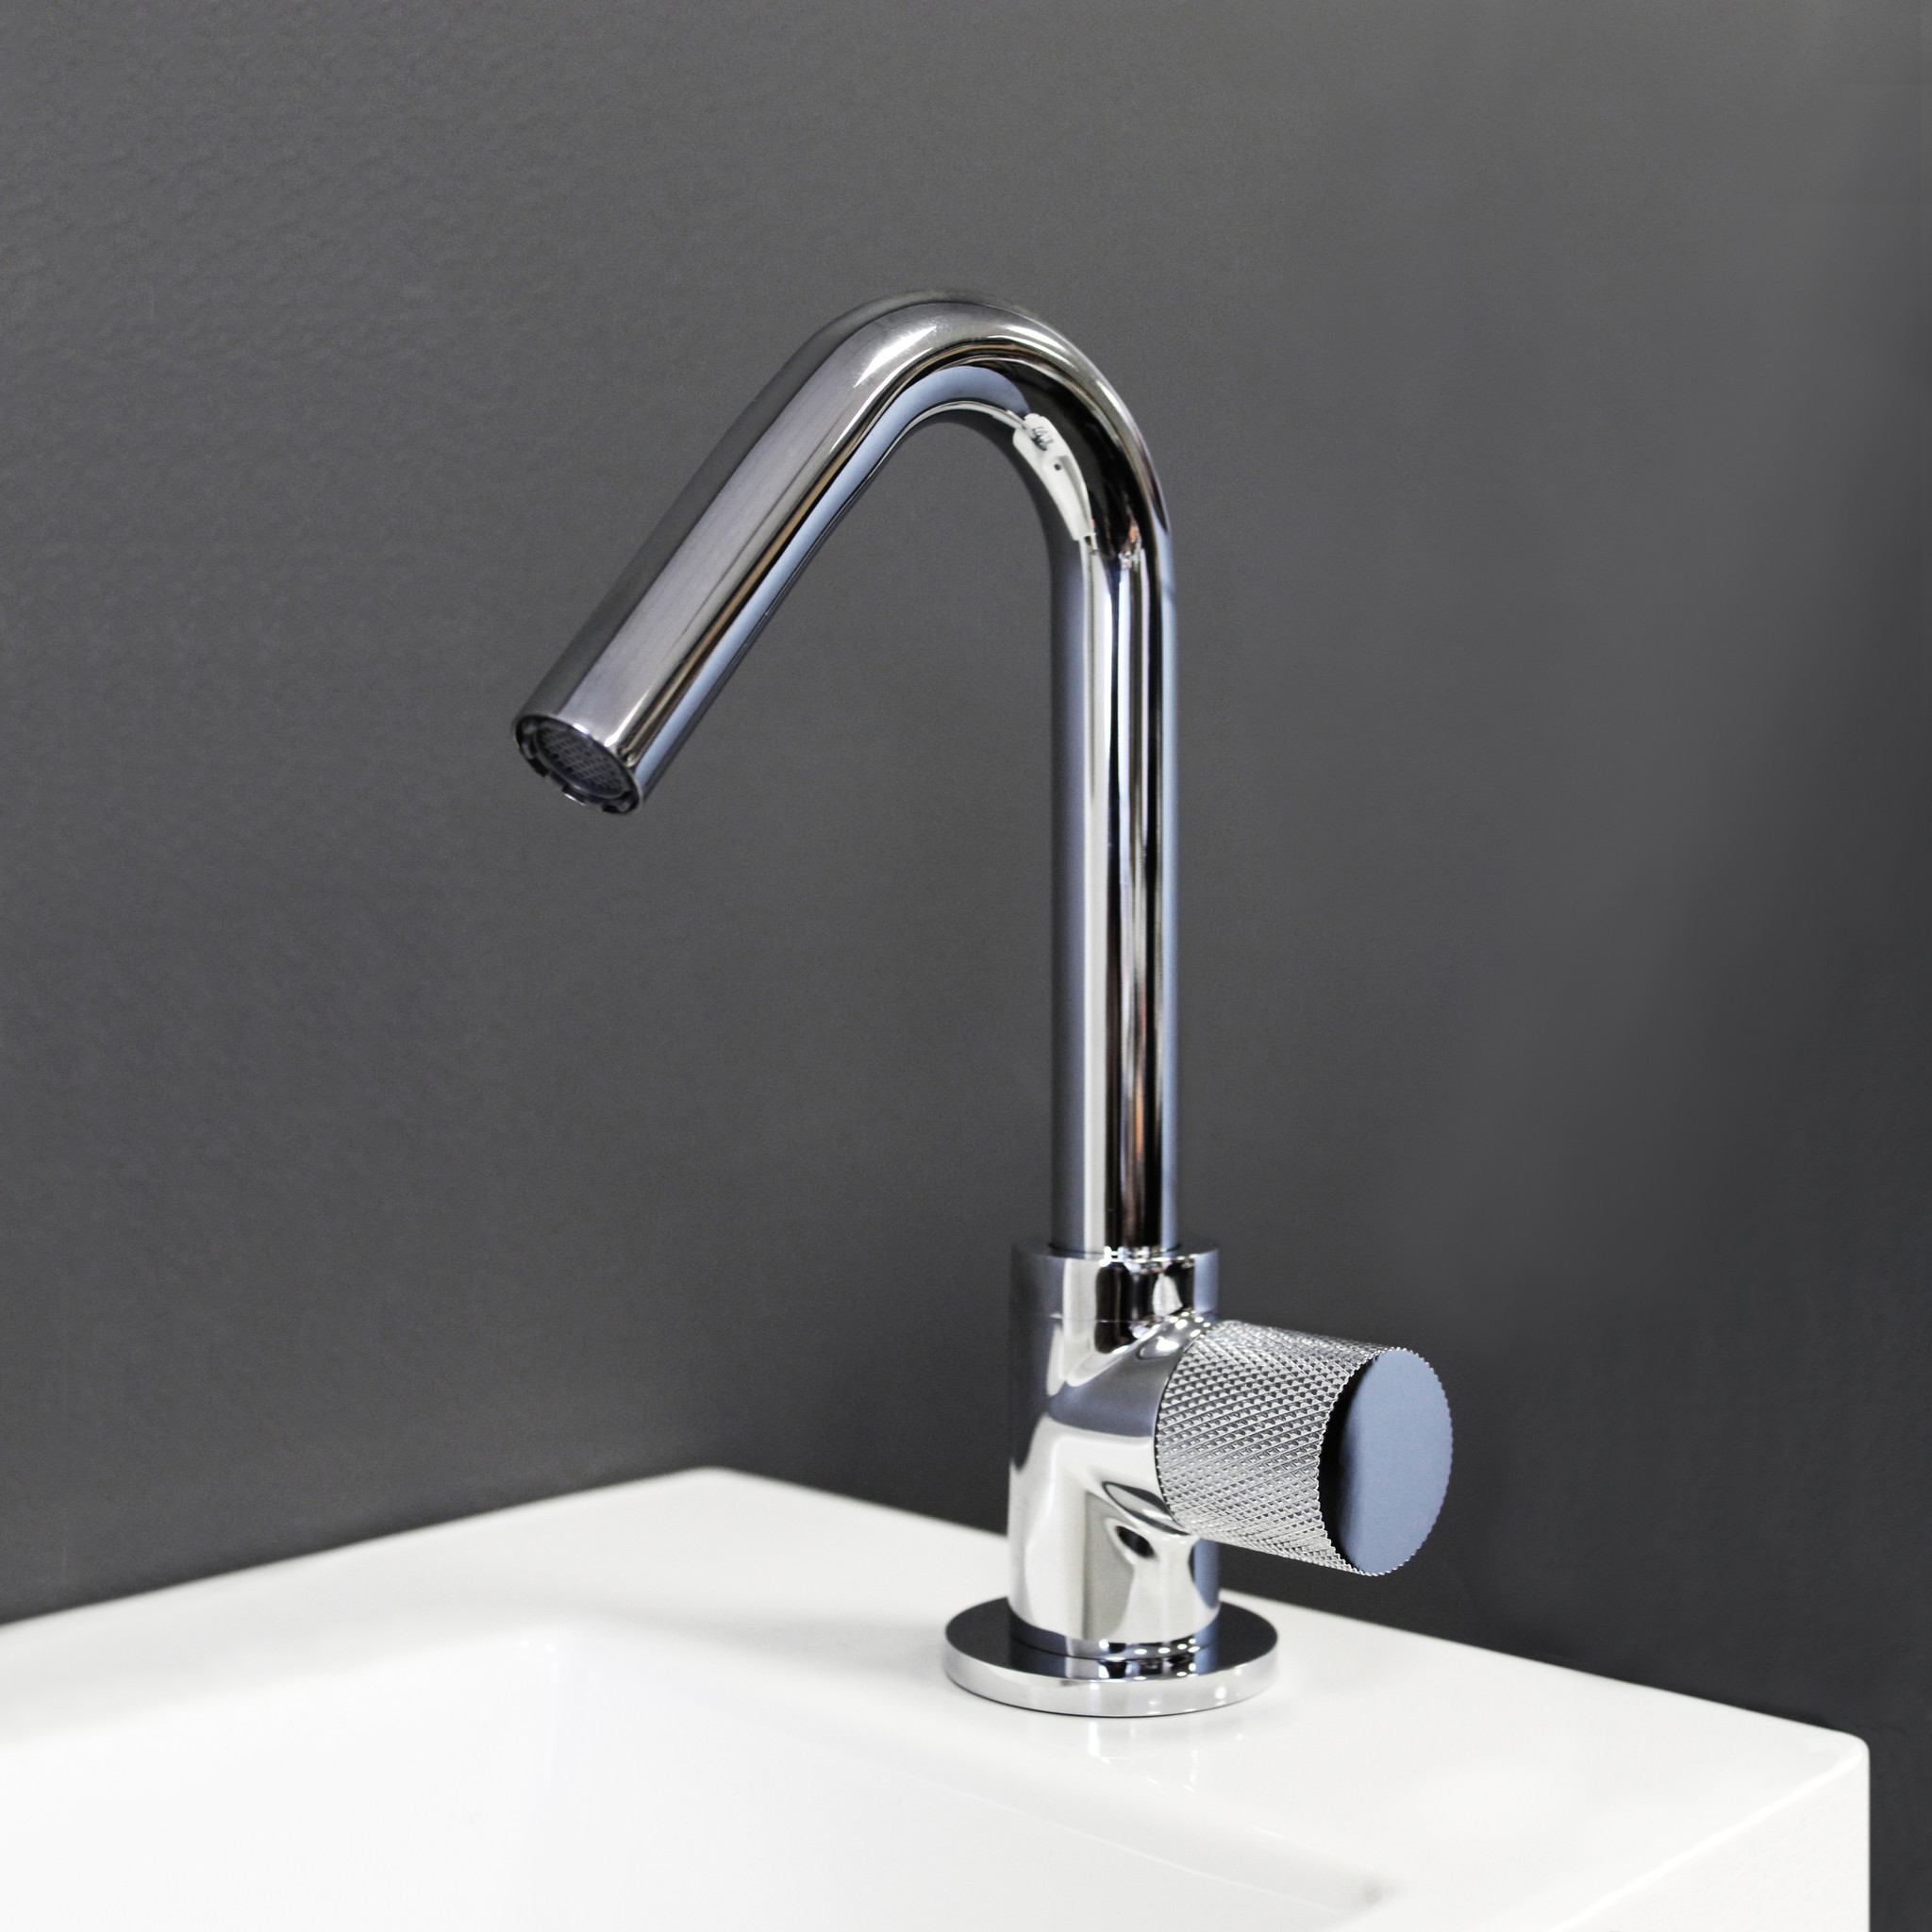 InBe cold water tap